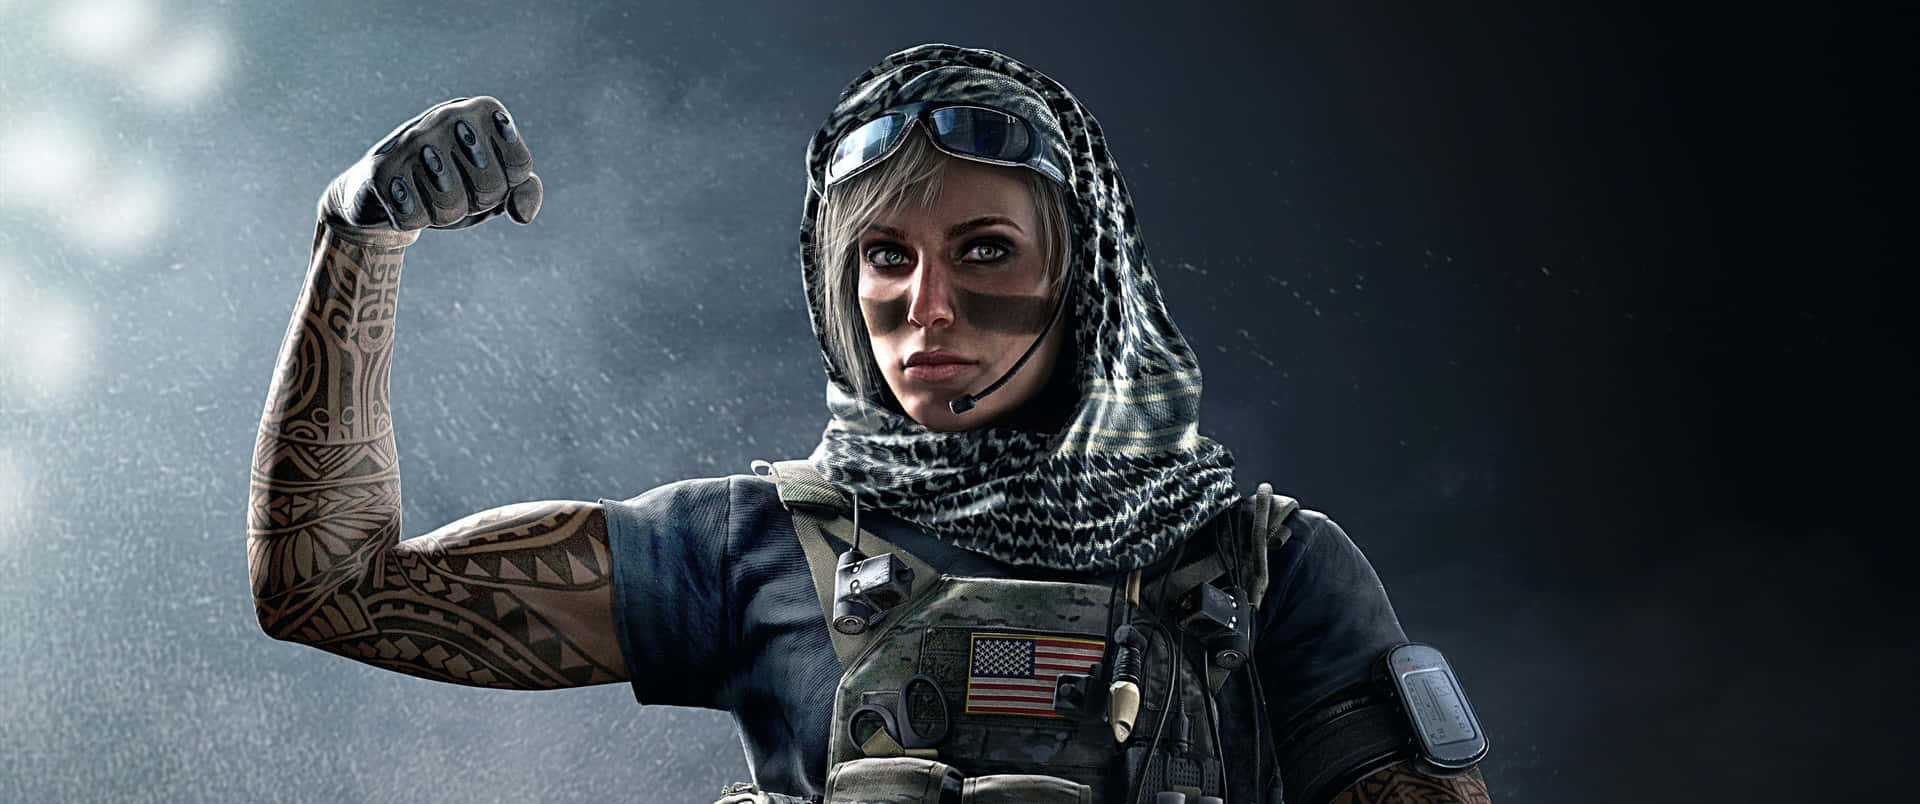 Get Ready for Epic Battles in Rainbow Six Siege